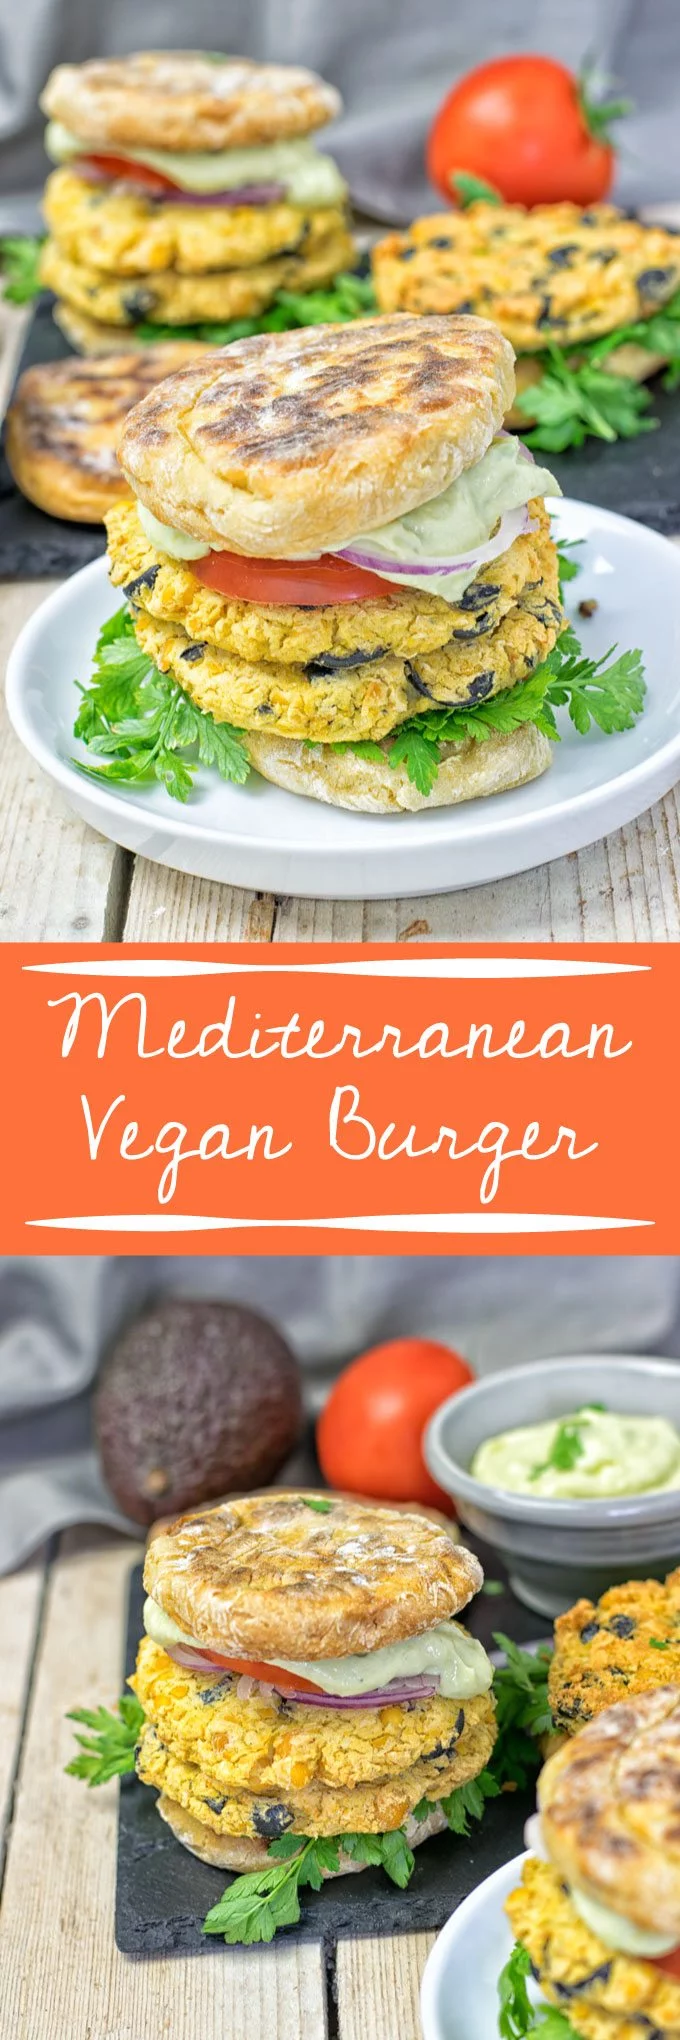 Collage of two pictures of the Mediterranean Vegan Burger with recipe title text.